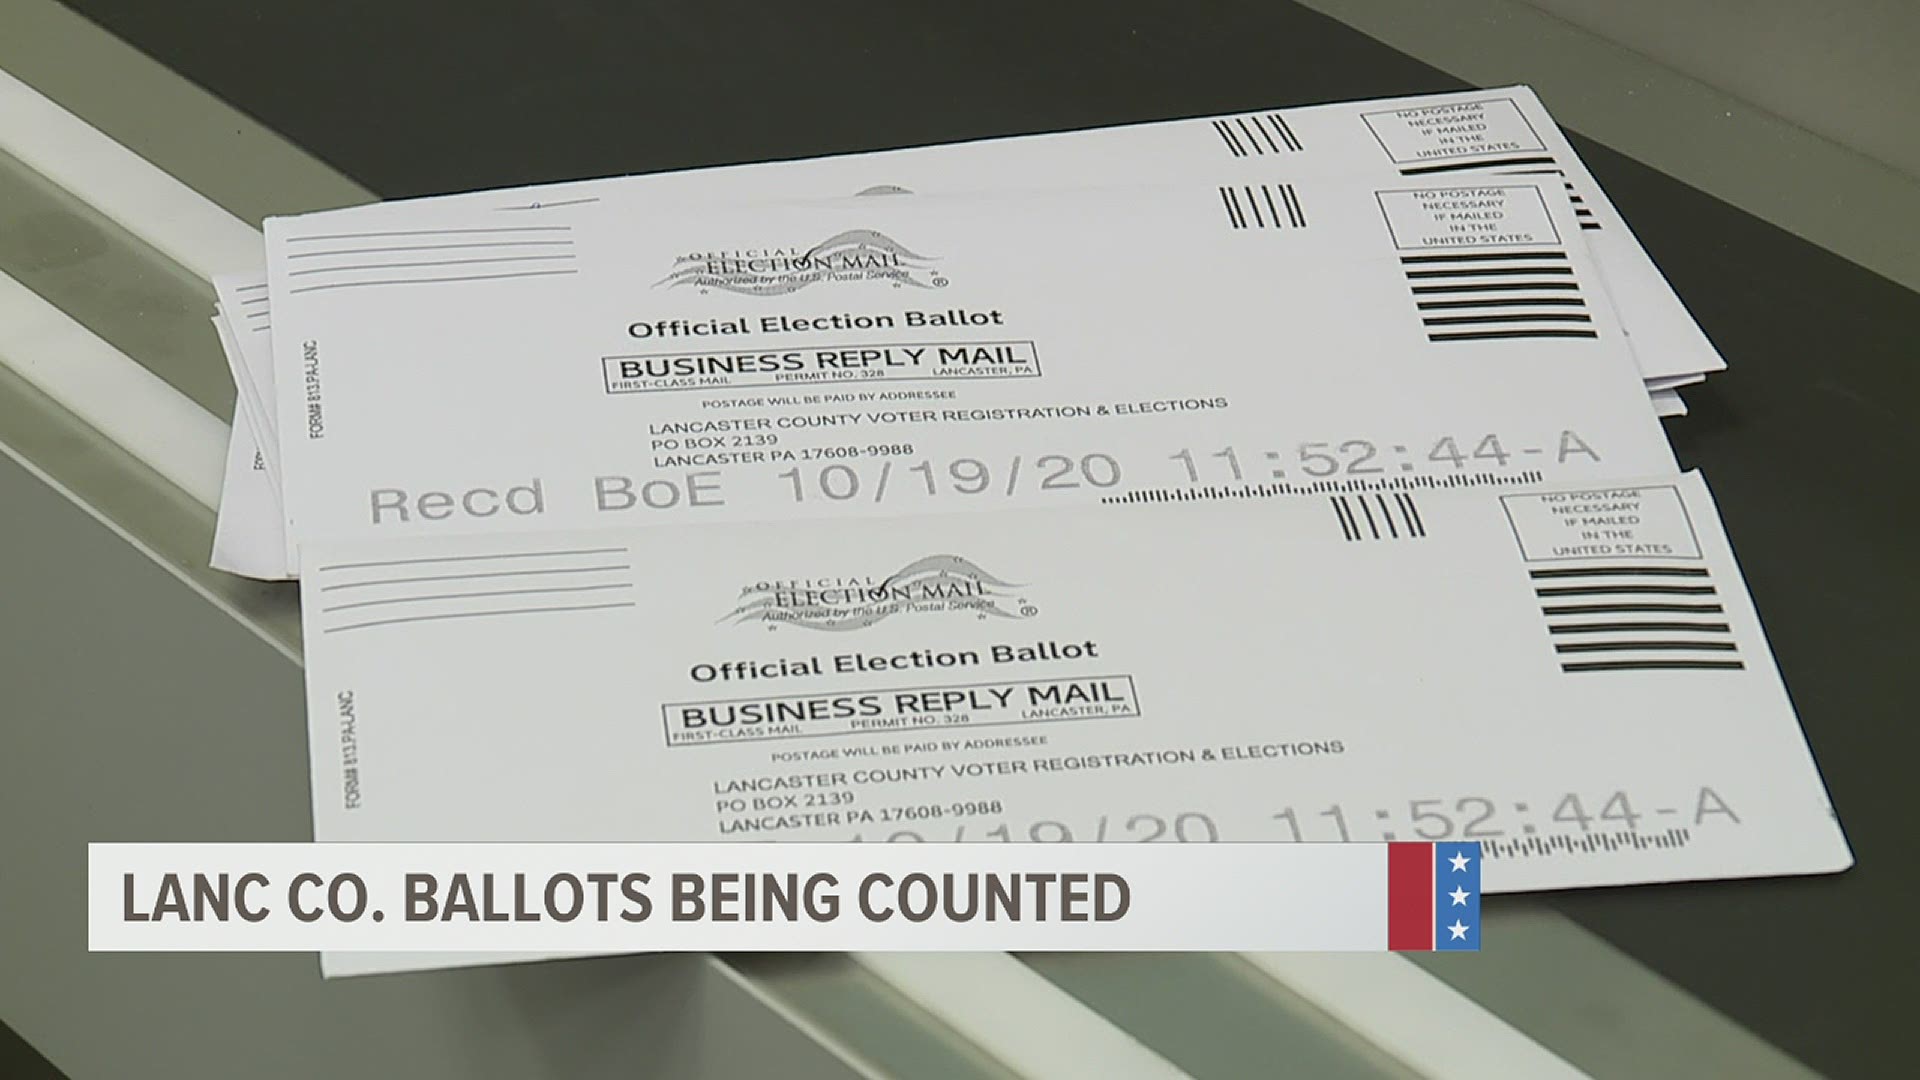 Commissioner Craig Lehman says count the mail-in ballots and segregate them. However, the county's other commissioners believe that could create a conflict.